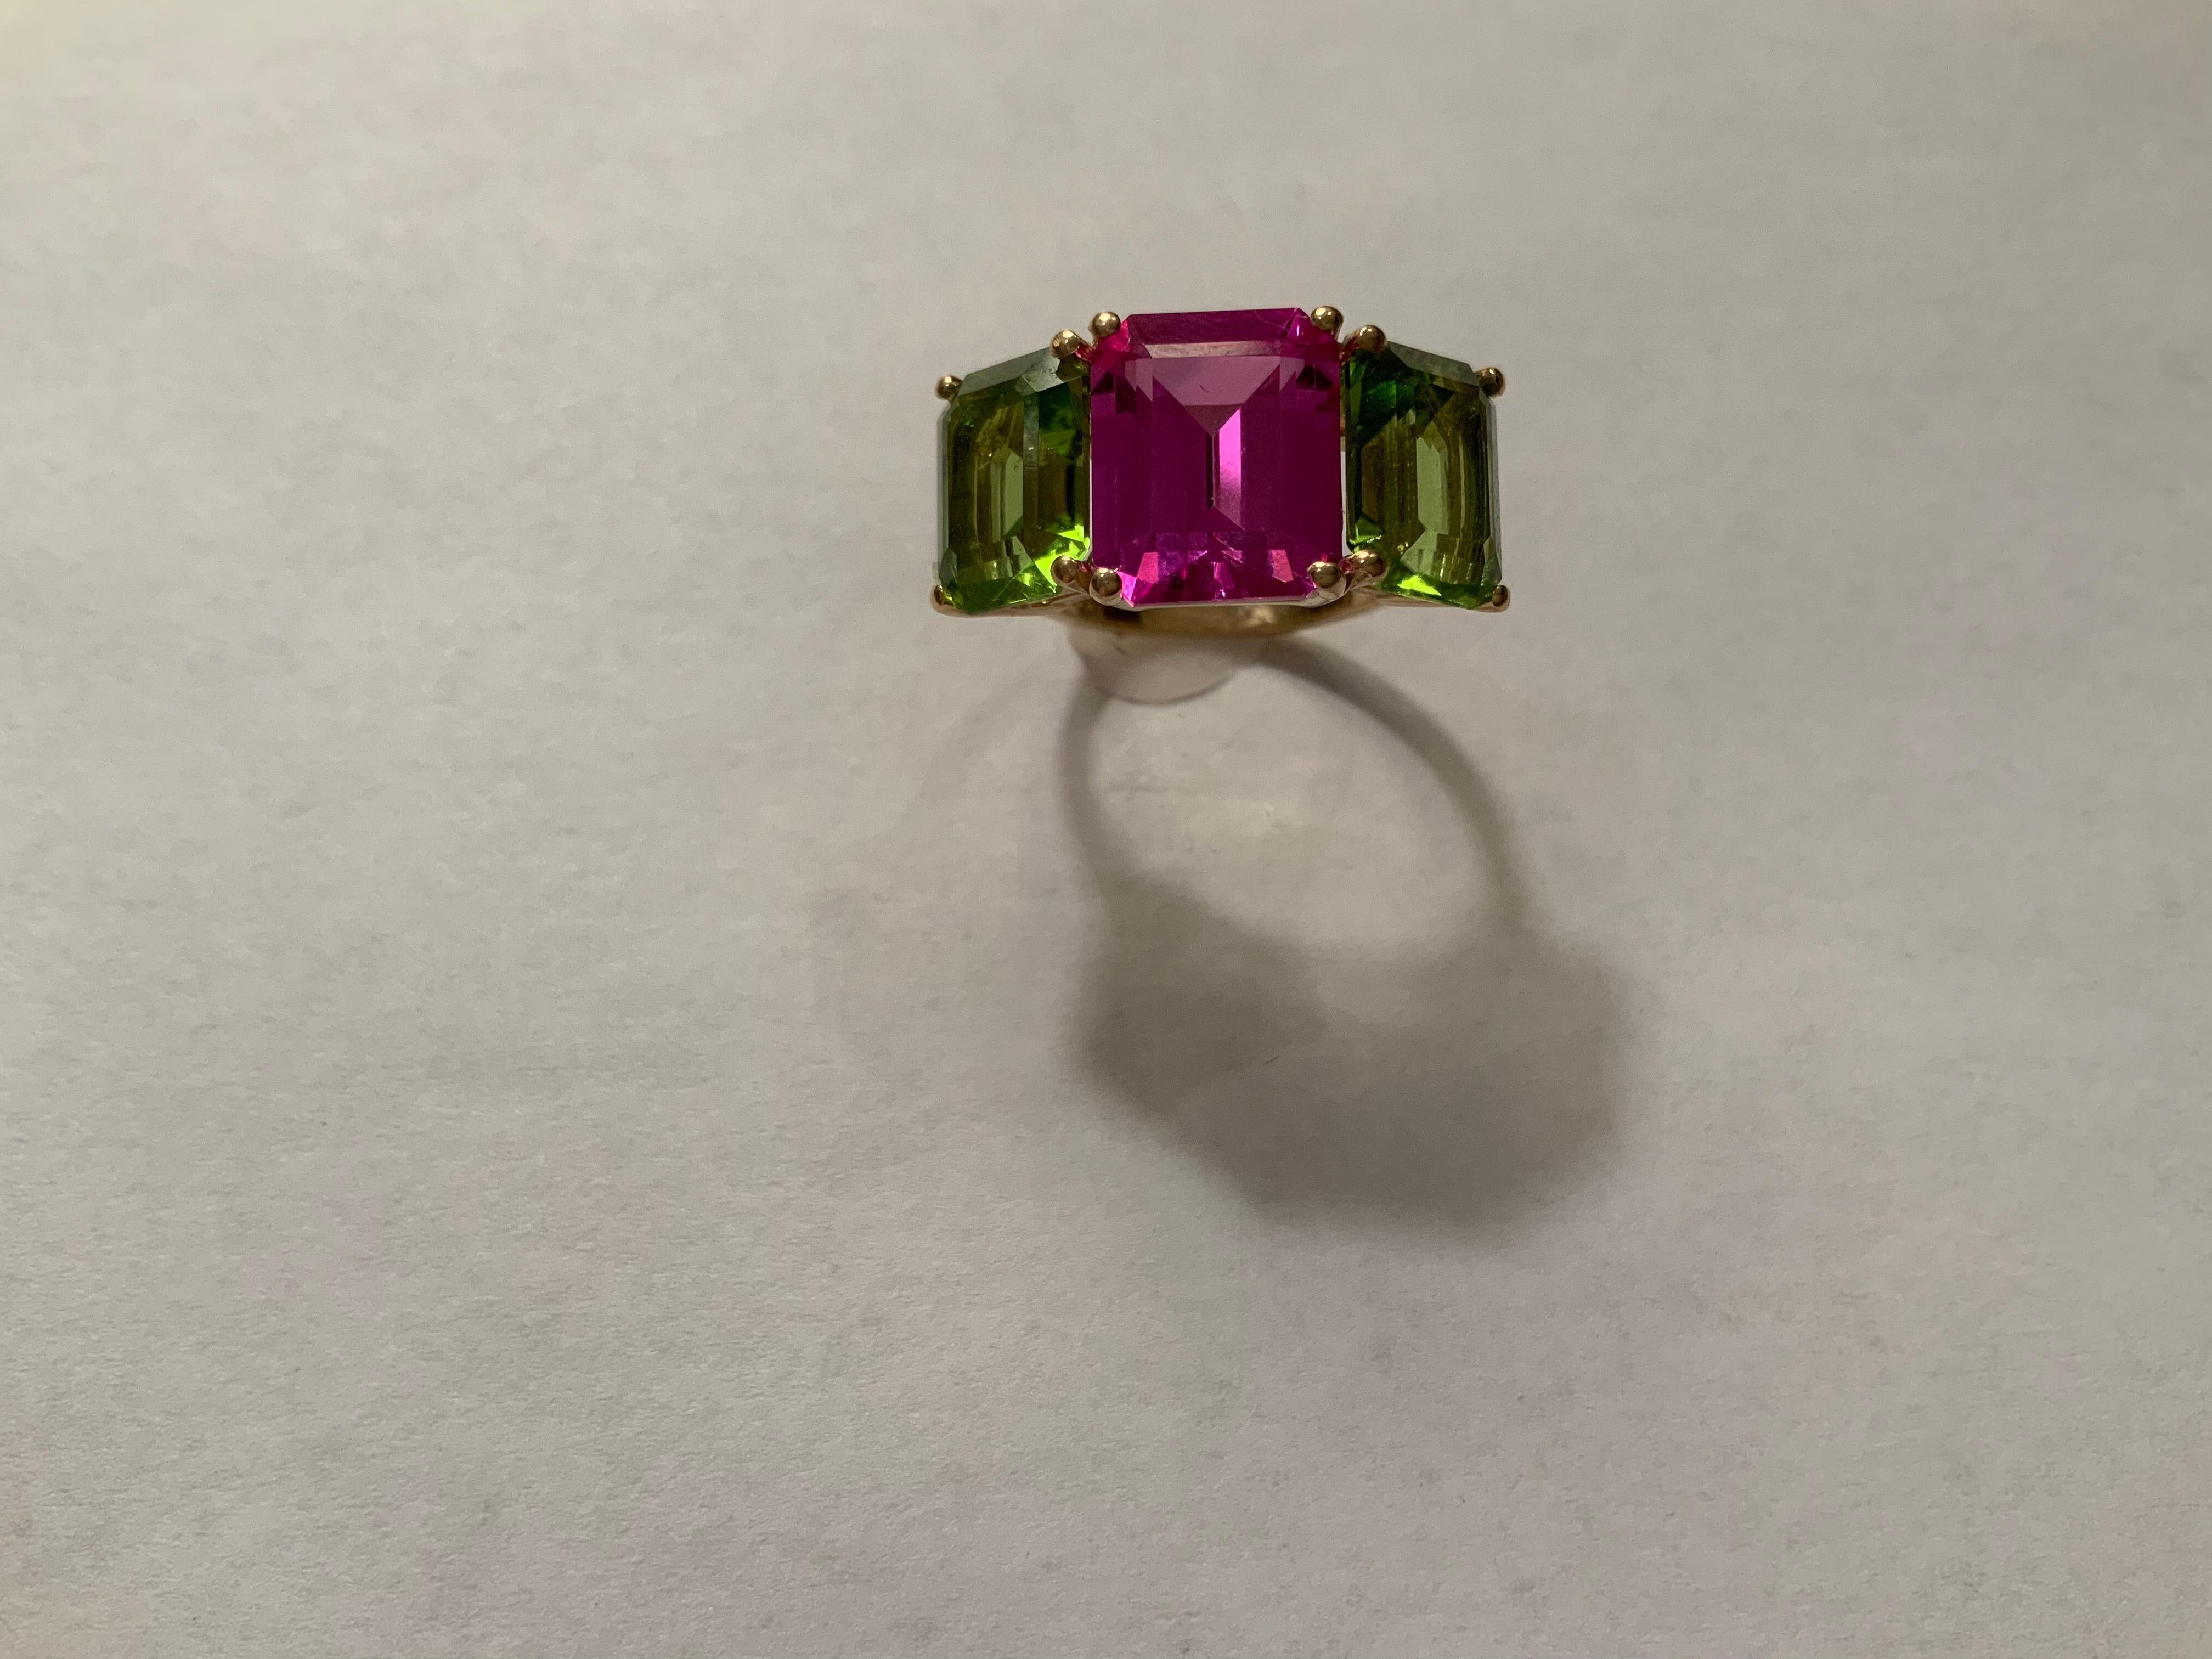 Yellow Gold Semi Precious Mini Emerald Cut Ring with Pink Topaz and Peridot For Sale 11